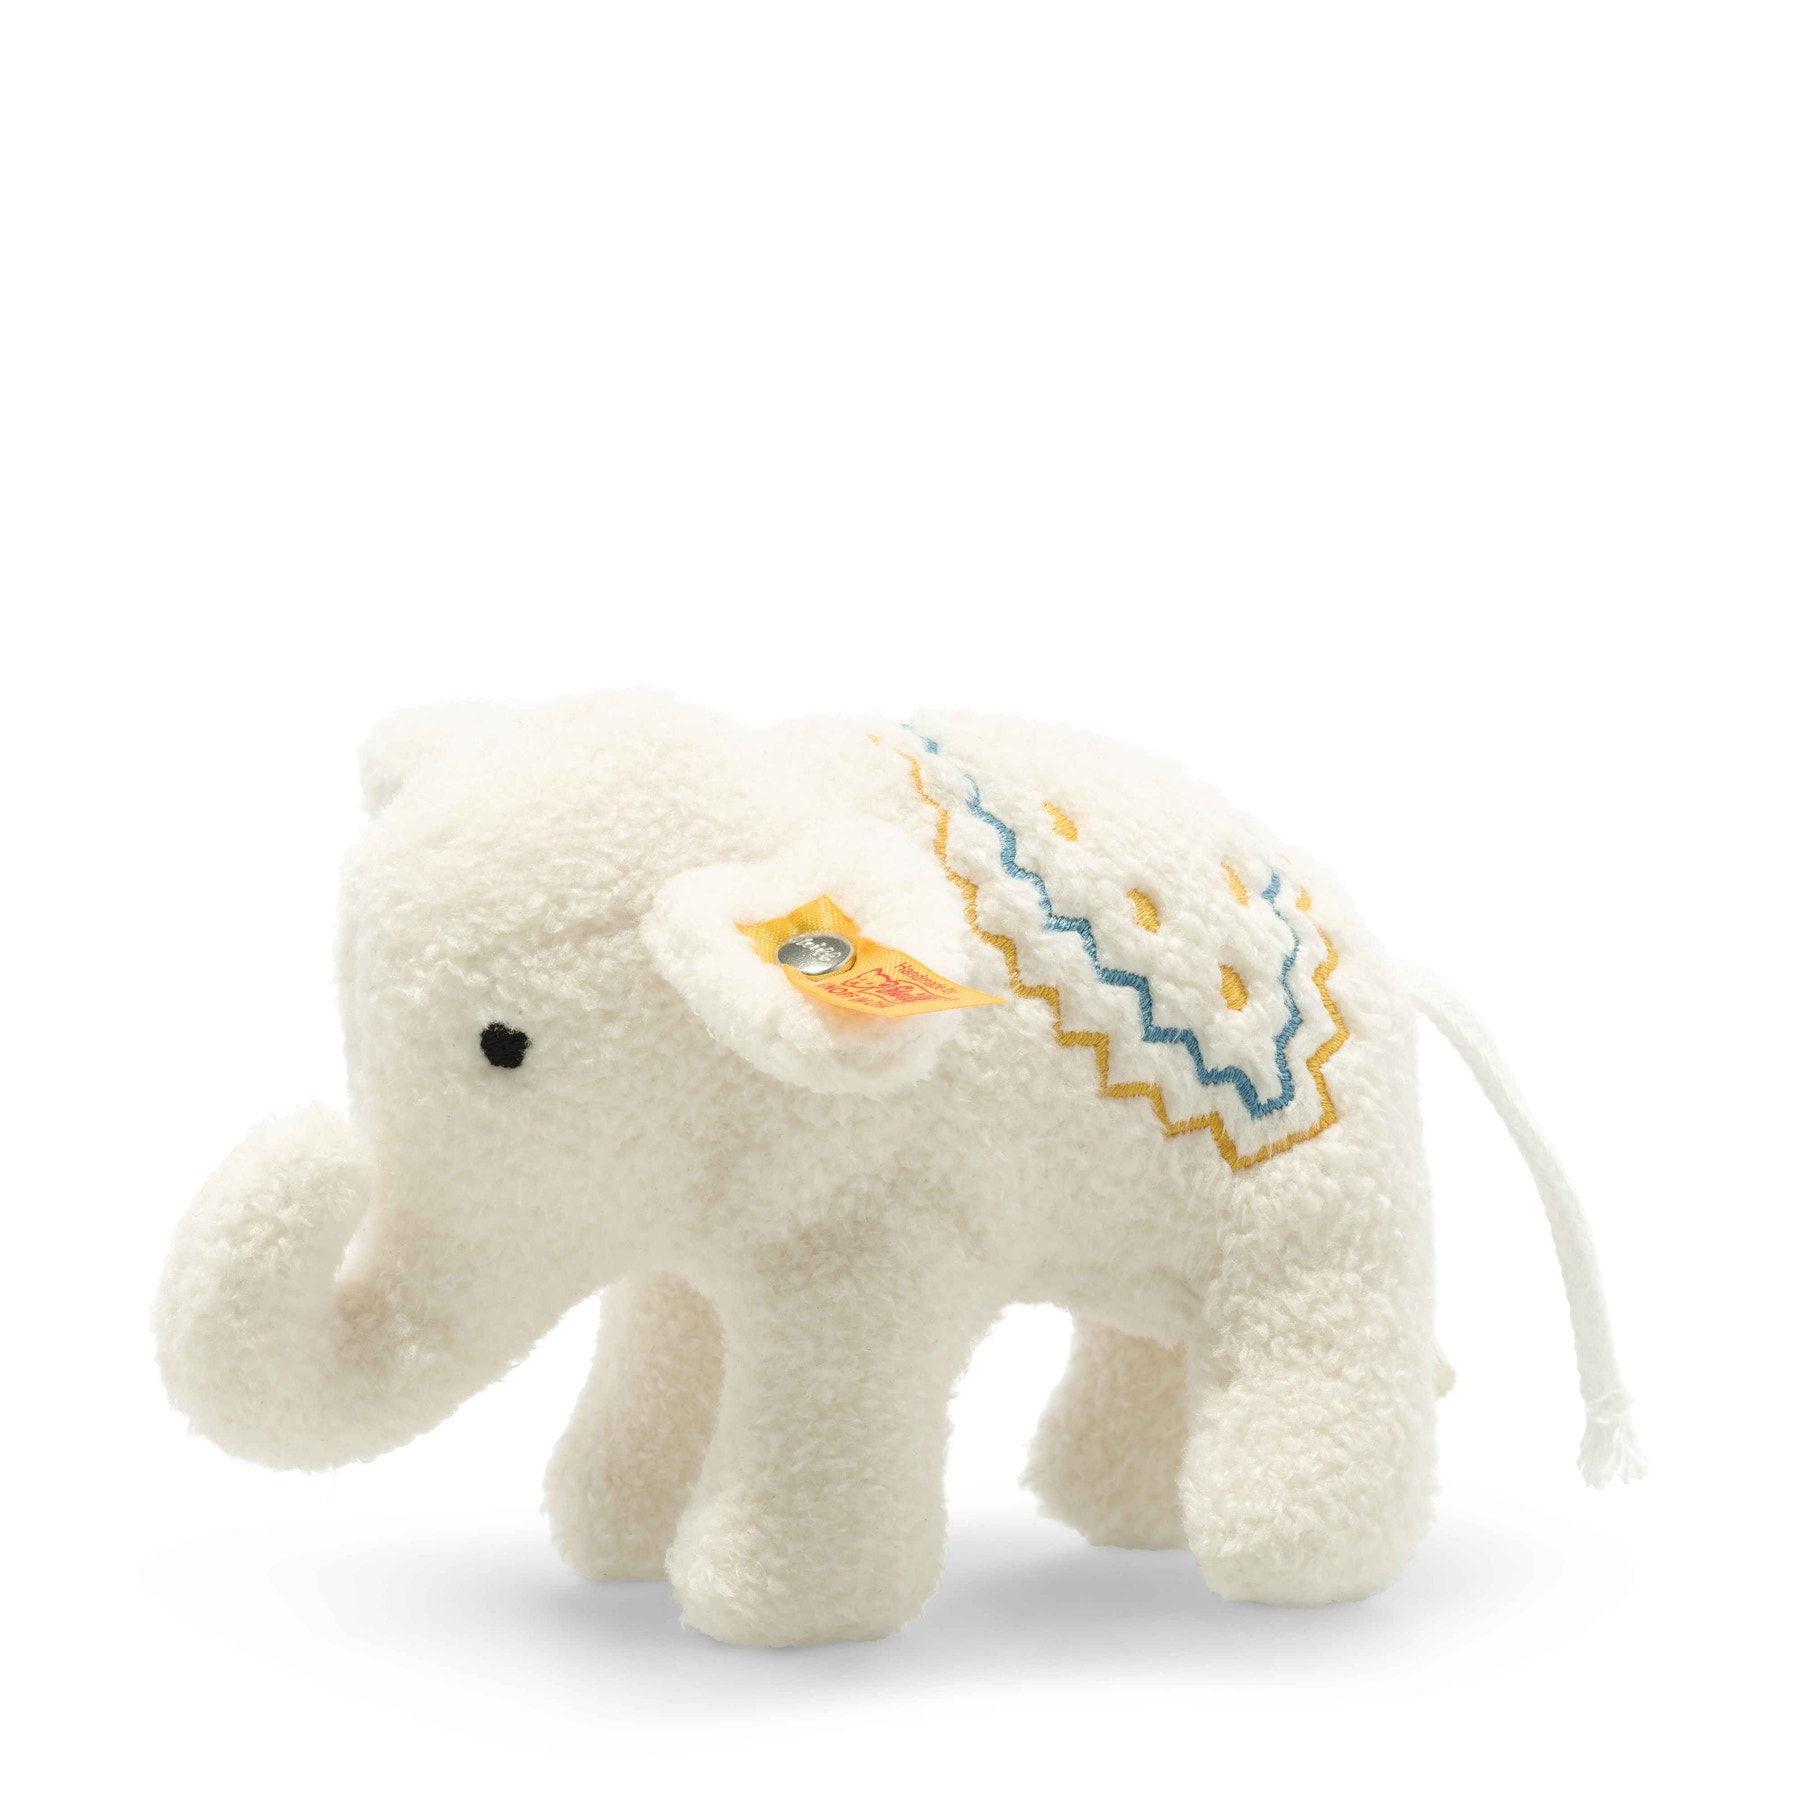 Little elephant with rattle